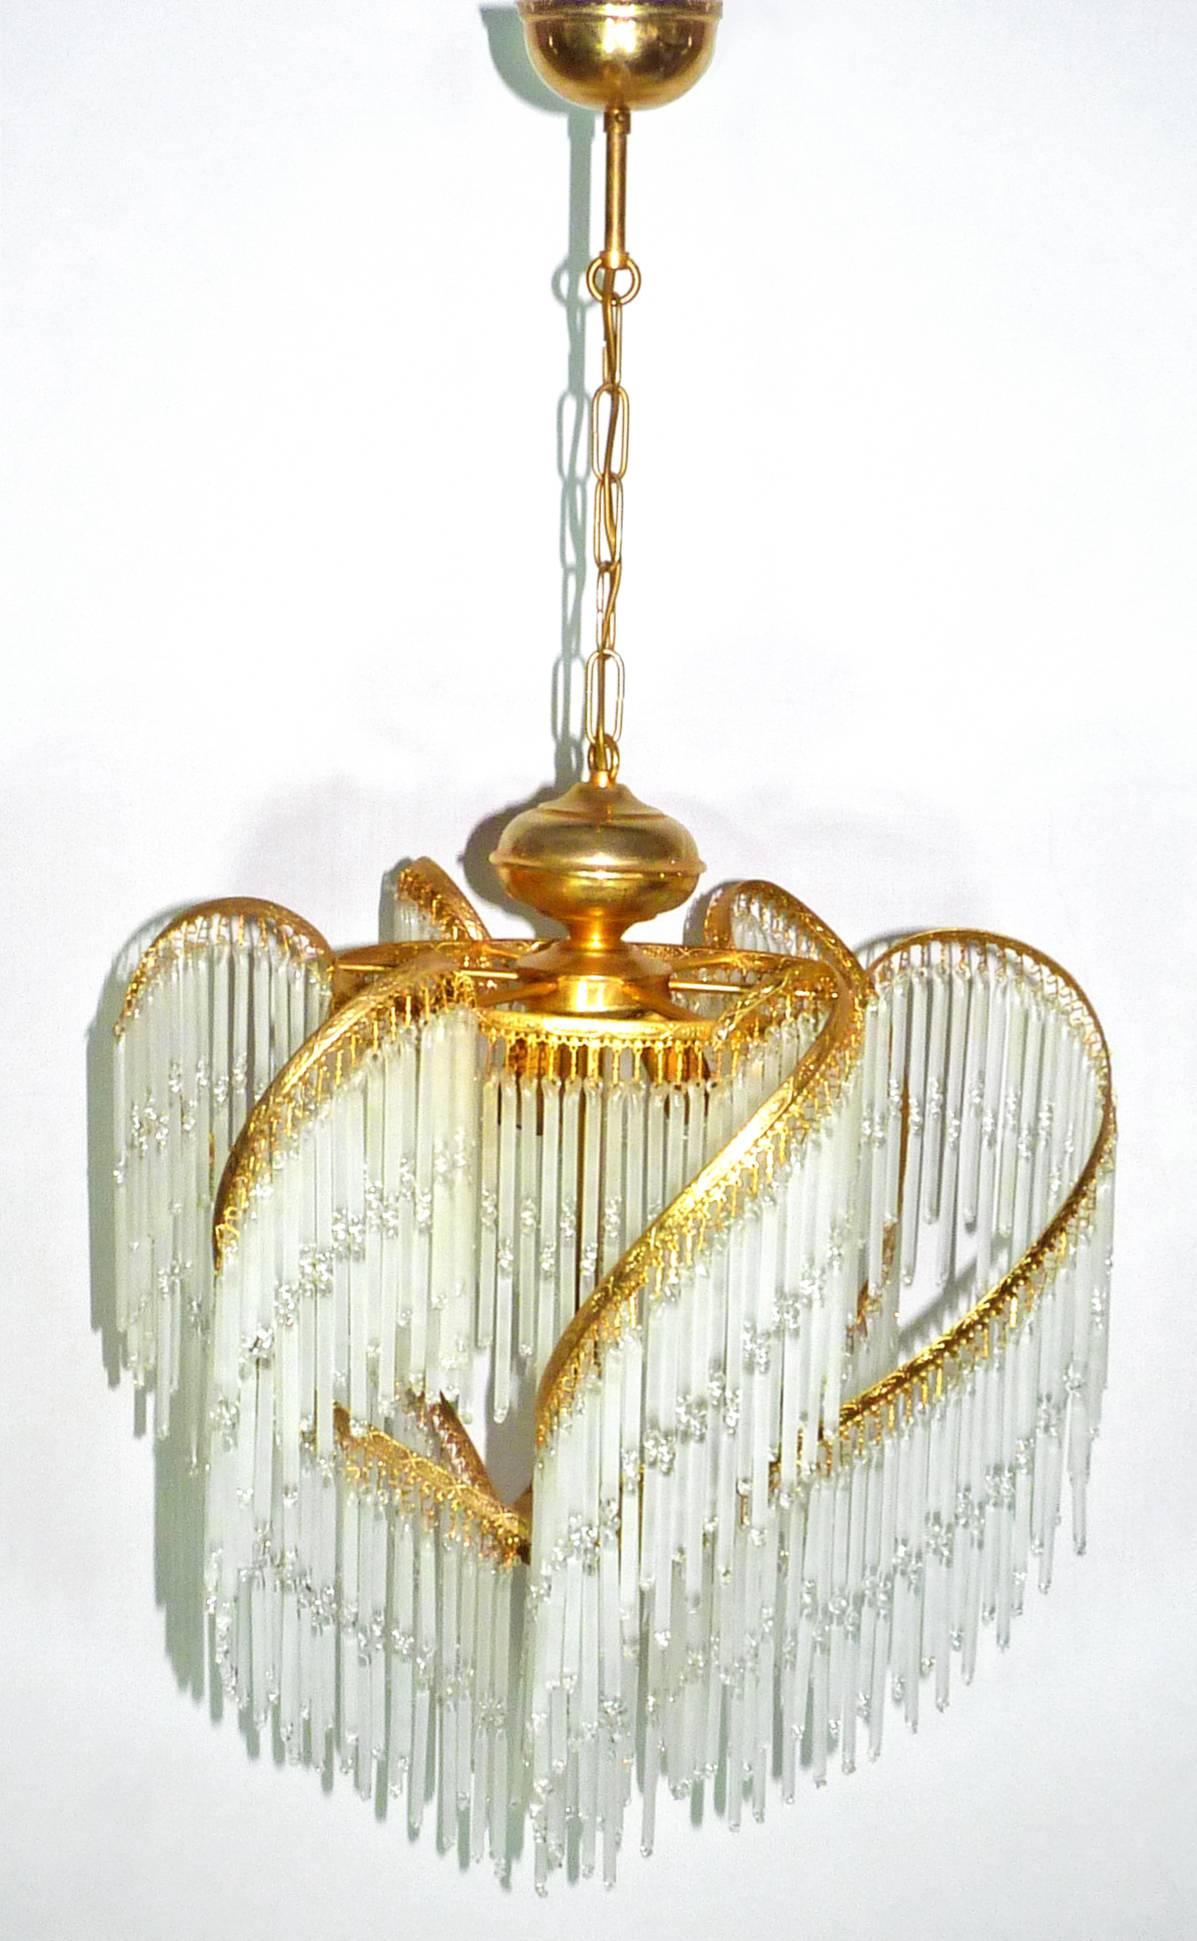 Fabulous midcentury Art Deco or Art Nouveau frosted and clear crystal glass fringe gilt spiral chandelier.
Measures:
Diameter 20 in/ 50 cm
Height 36 in/ 90 cm
Weight: 7 lb/ 6 Kg
Three light bulbs E14/ Good working condition
Assembly required. Bulbs